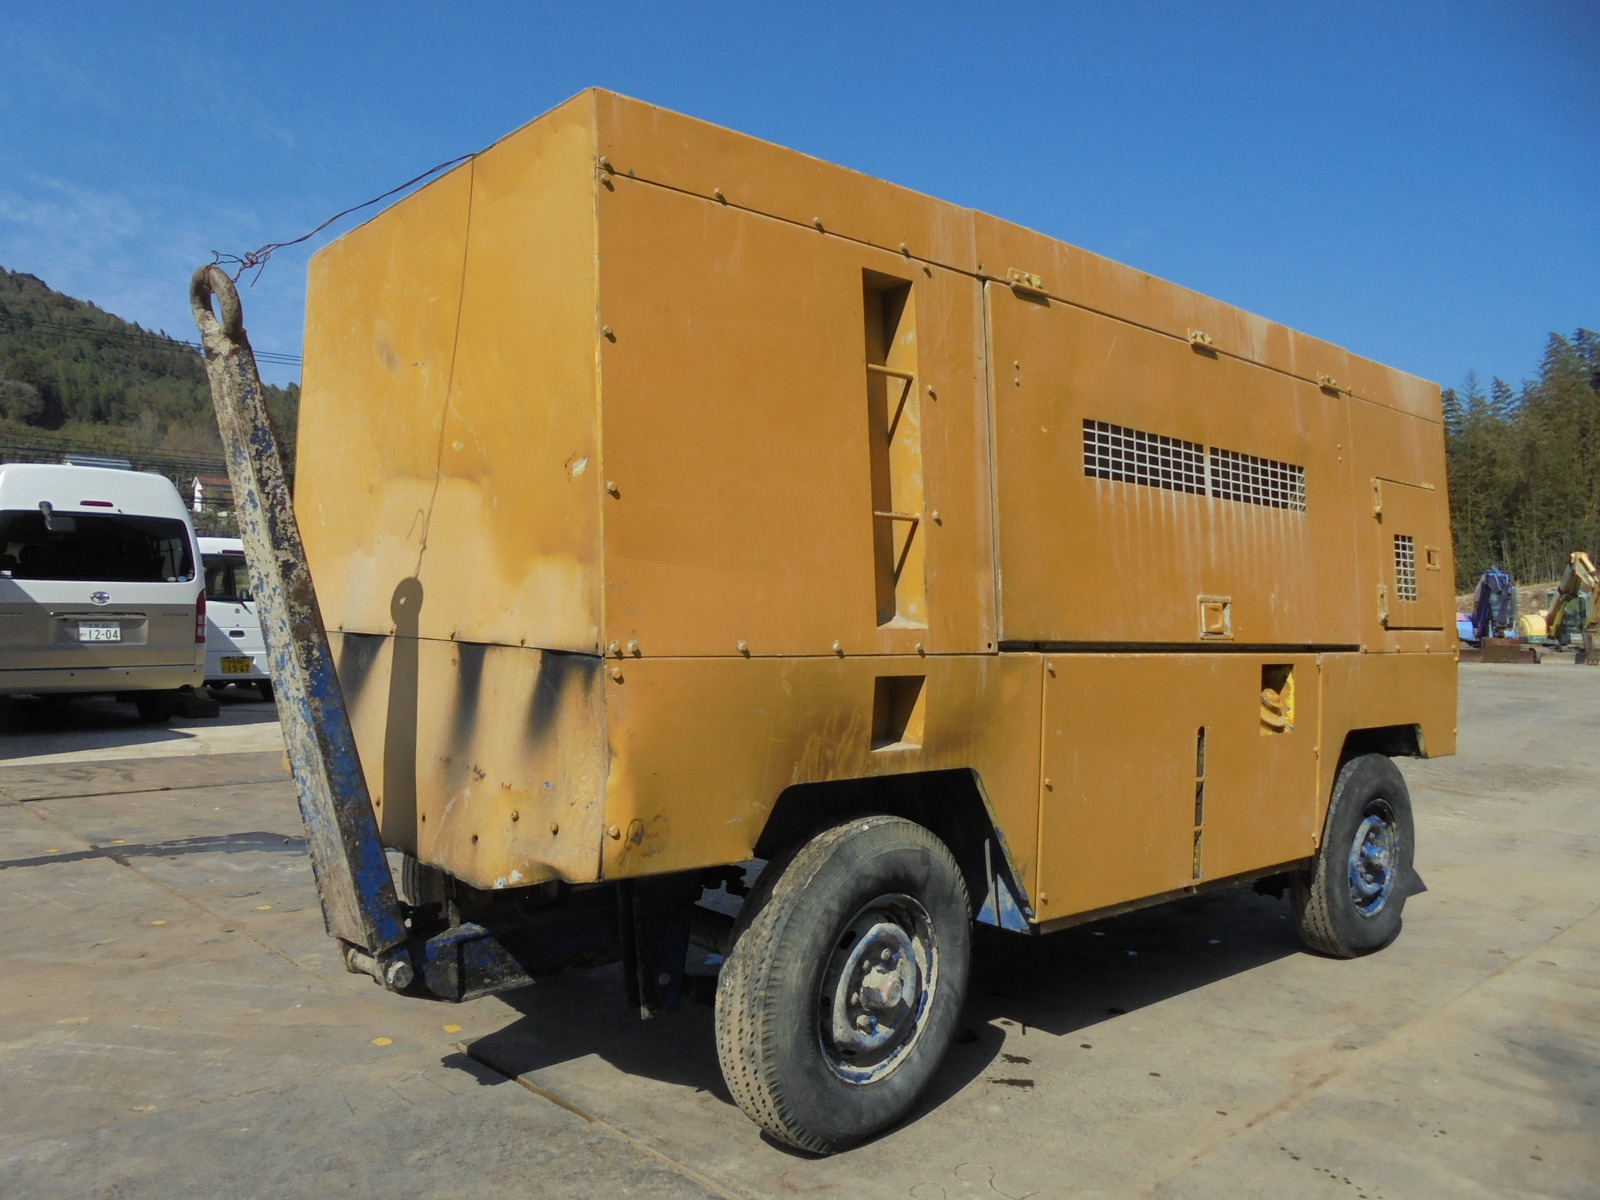 Used Construction Machine Used DENYO DENYO Compressor  DPS-670SS2